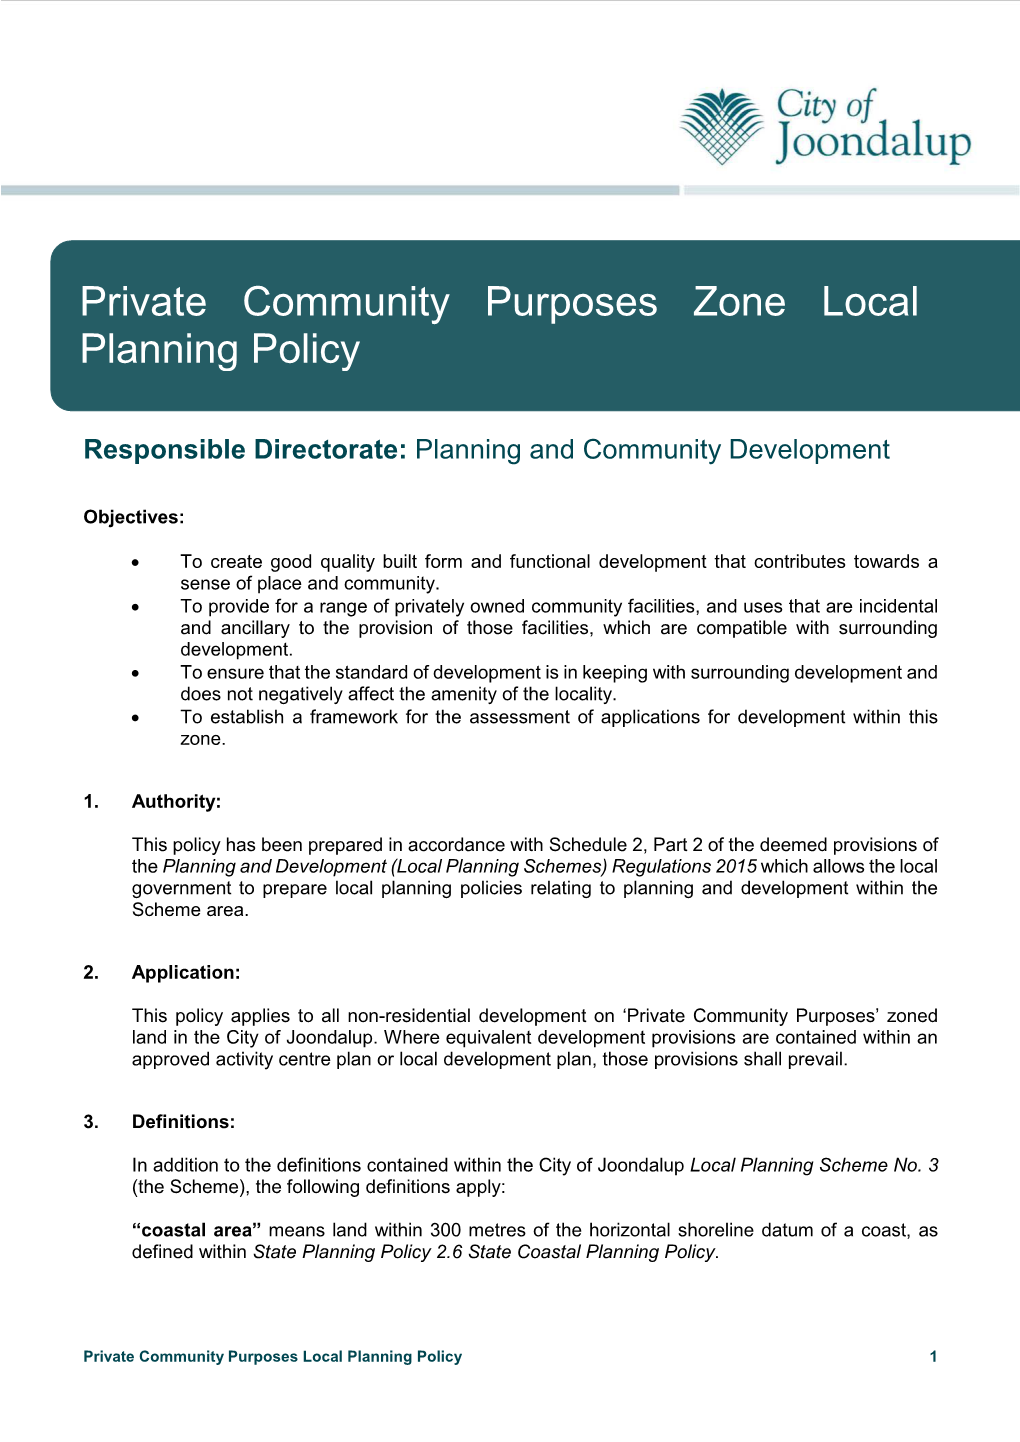 Private Community Purposes Zone Local Planning Policy